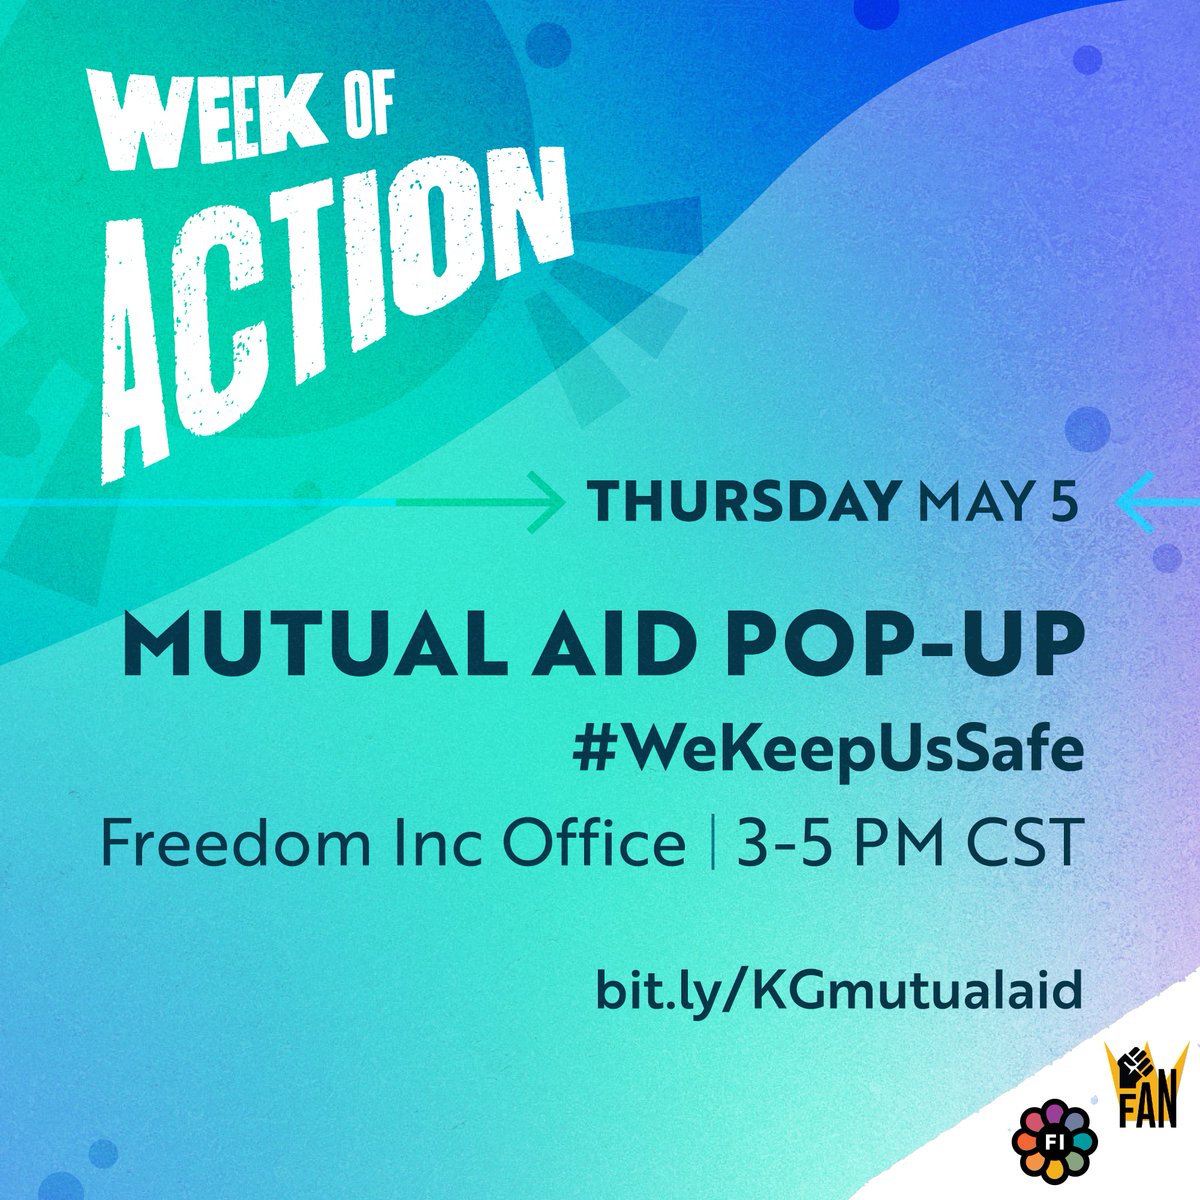 TODAY @freedomInc's Mutual Aid team and @FreedomActionNow will be in Penn Park from 3-5 passing out safety and self defense gear cause #WeKeepUsSafe - Come through!! bit.ly/KGmutualaid